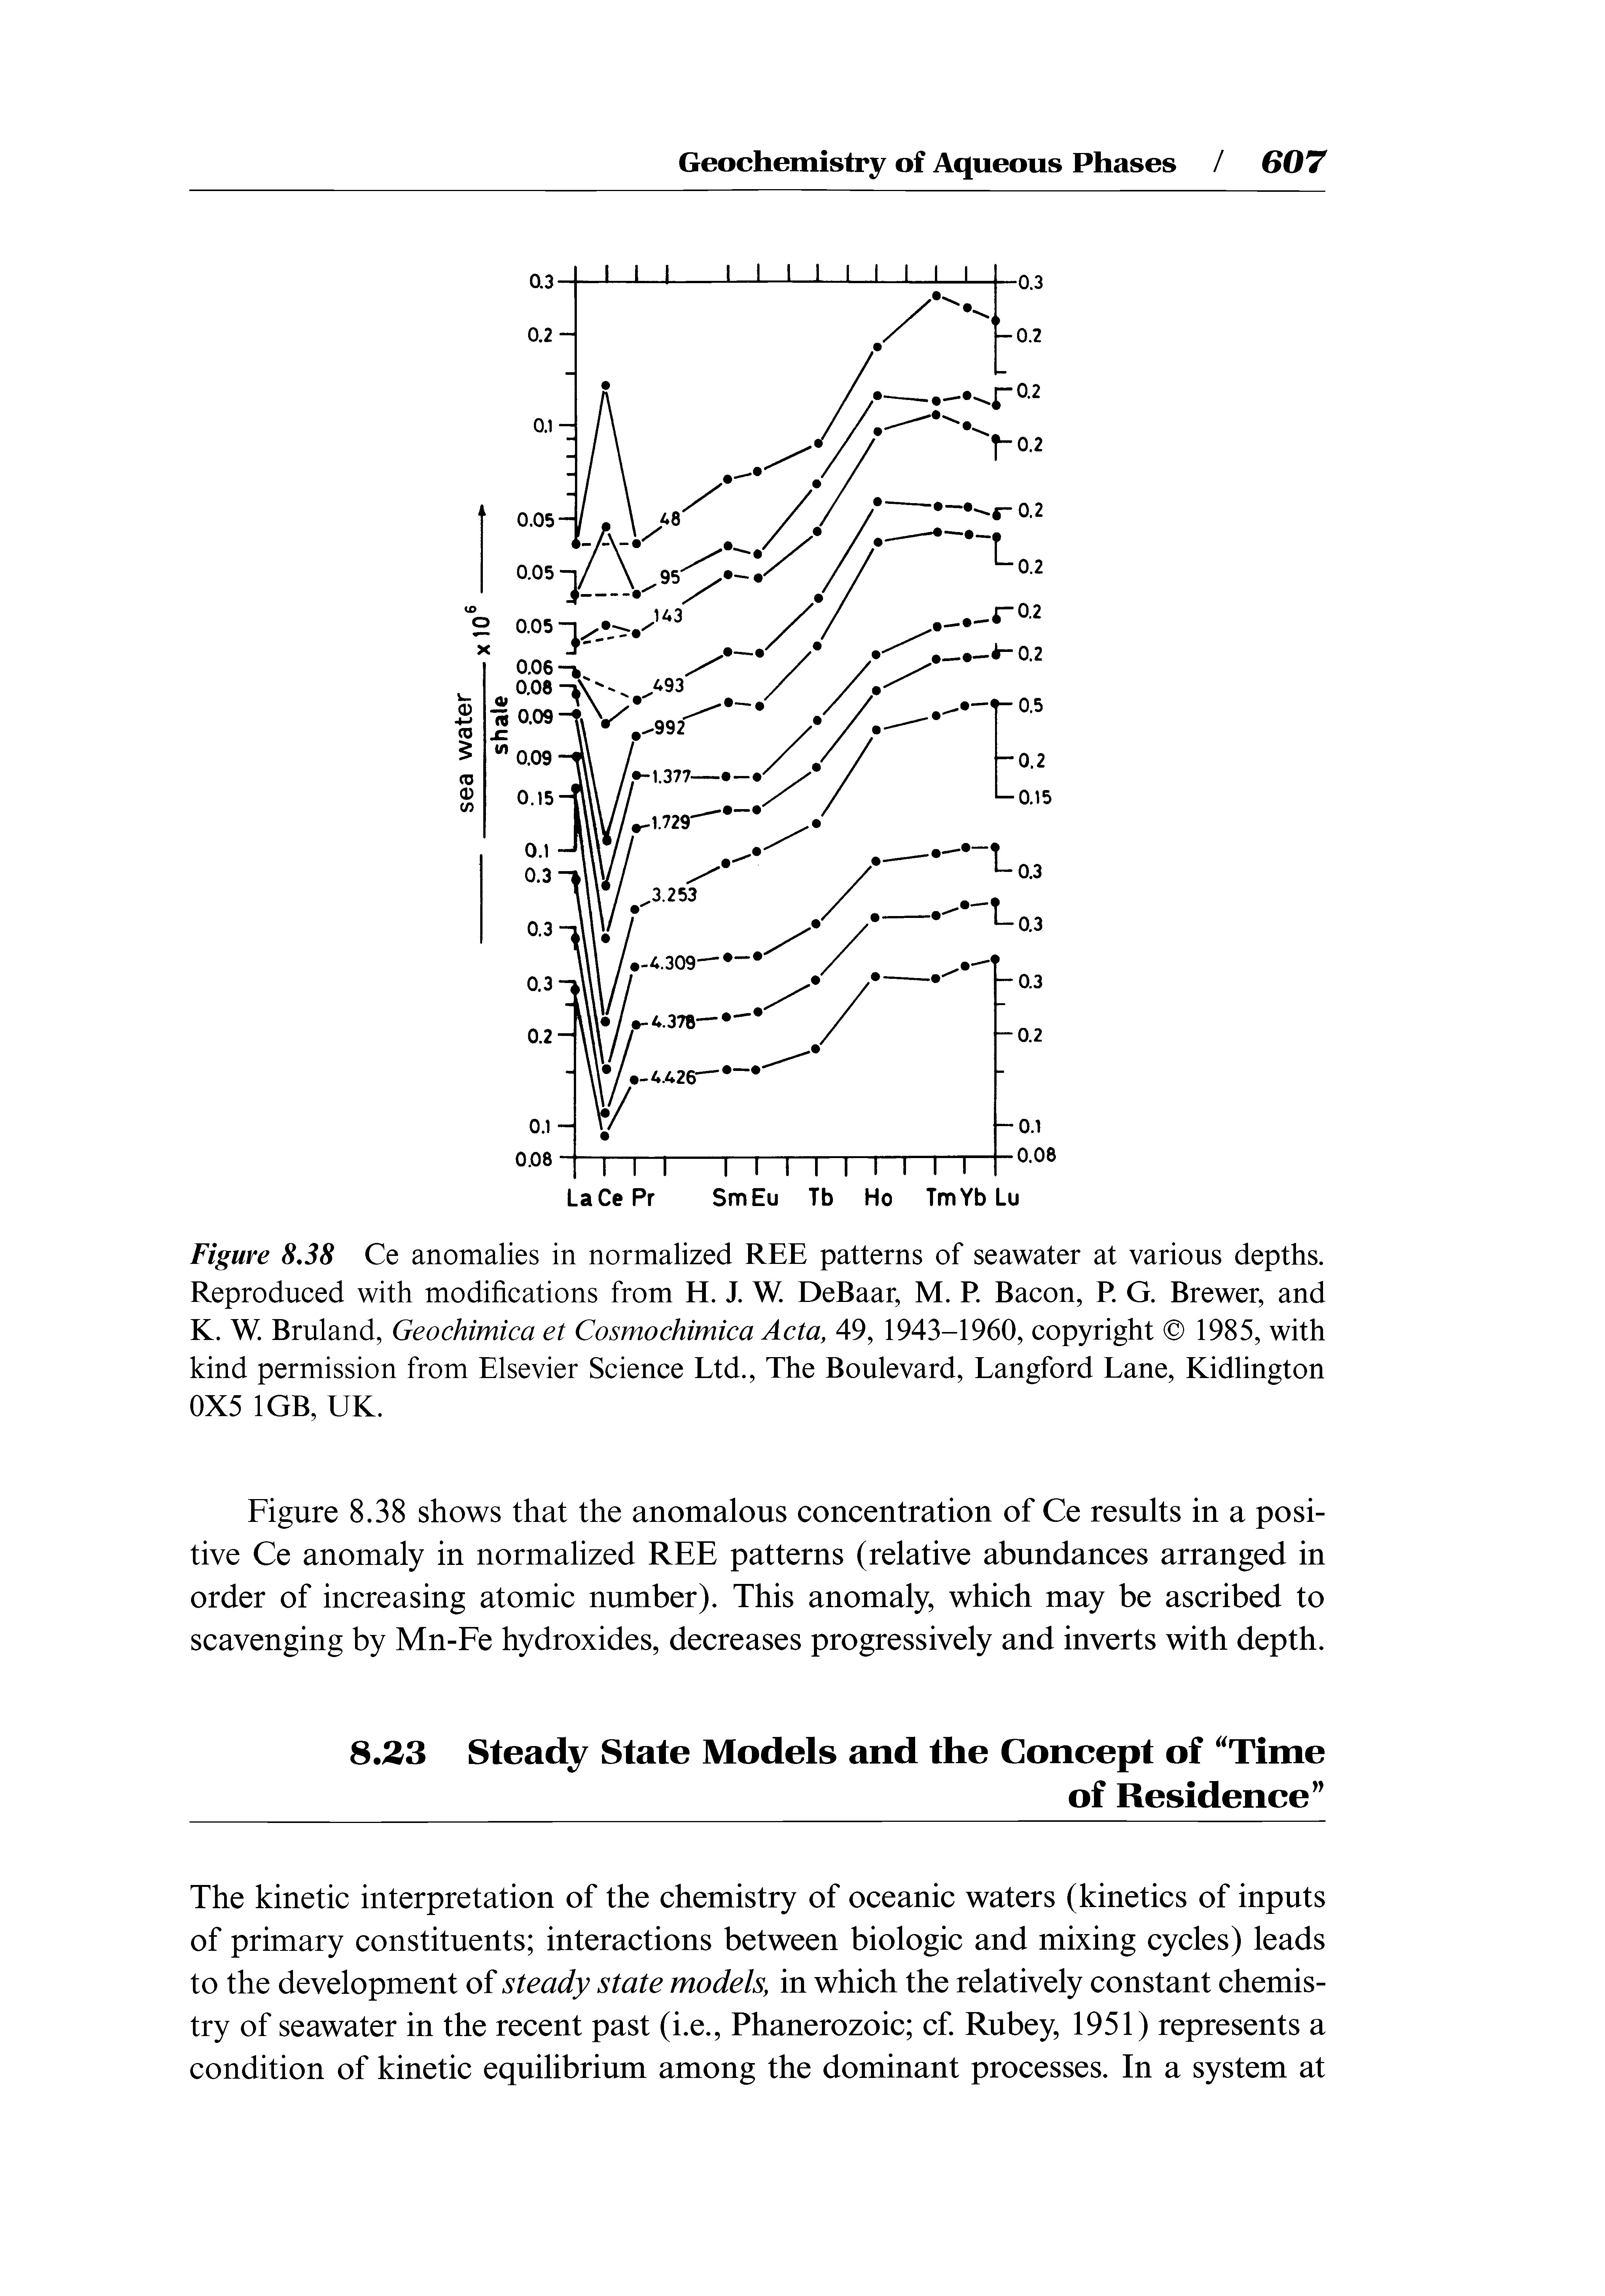 Figure 8.38 Ce anomalies in normalized REE patterns of seawater at various depths. Reproduced with modifications from H. J. W. DeBaar, M. R Bacon, P. G. Brewer, and K. W. Bruland, Geochimica et Cosmochimica Acta, 49, 1943-1960, copyright 1985, with kind permission from Elsevier Science Ltd., The Boulevard, Langford Lane, Kidlington 0X5 1GB, UK.